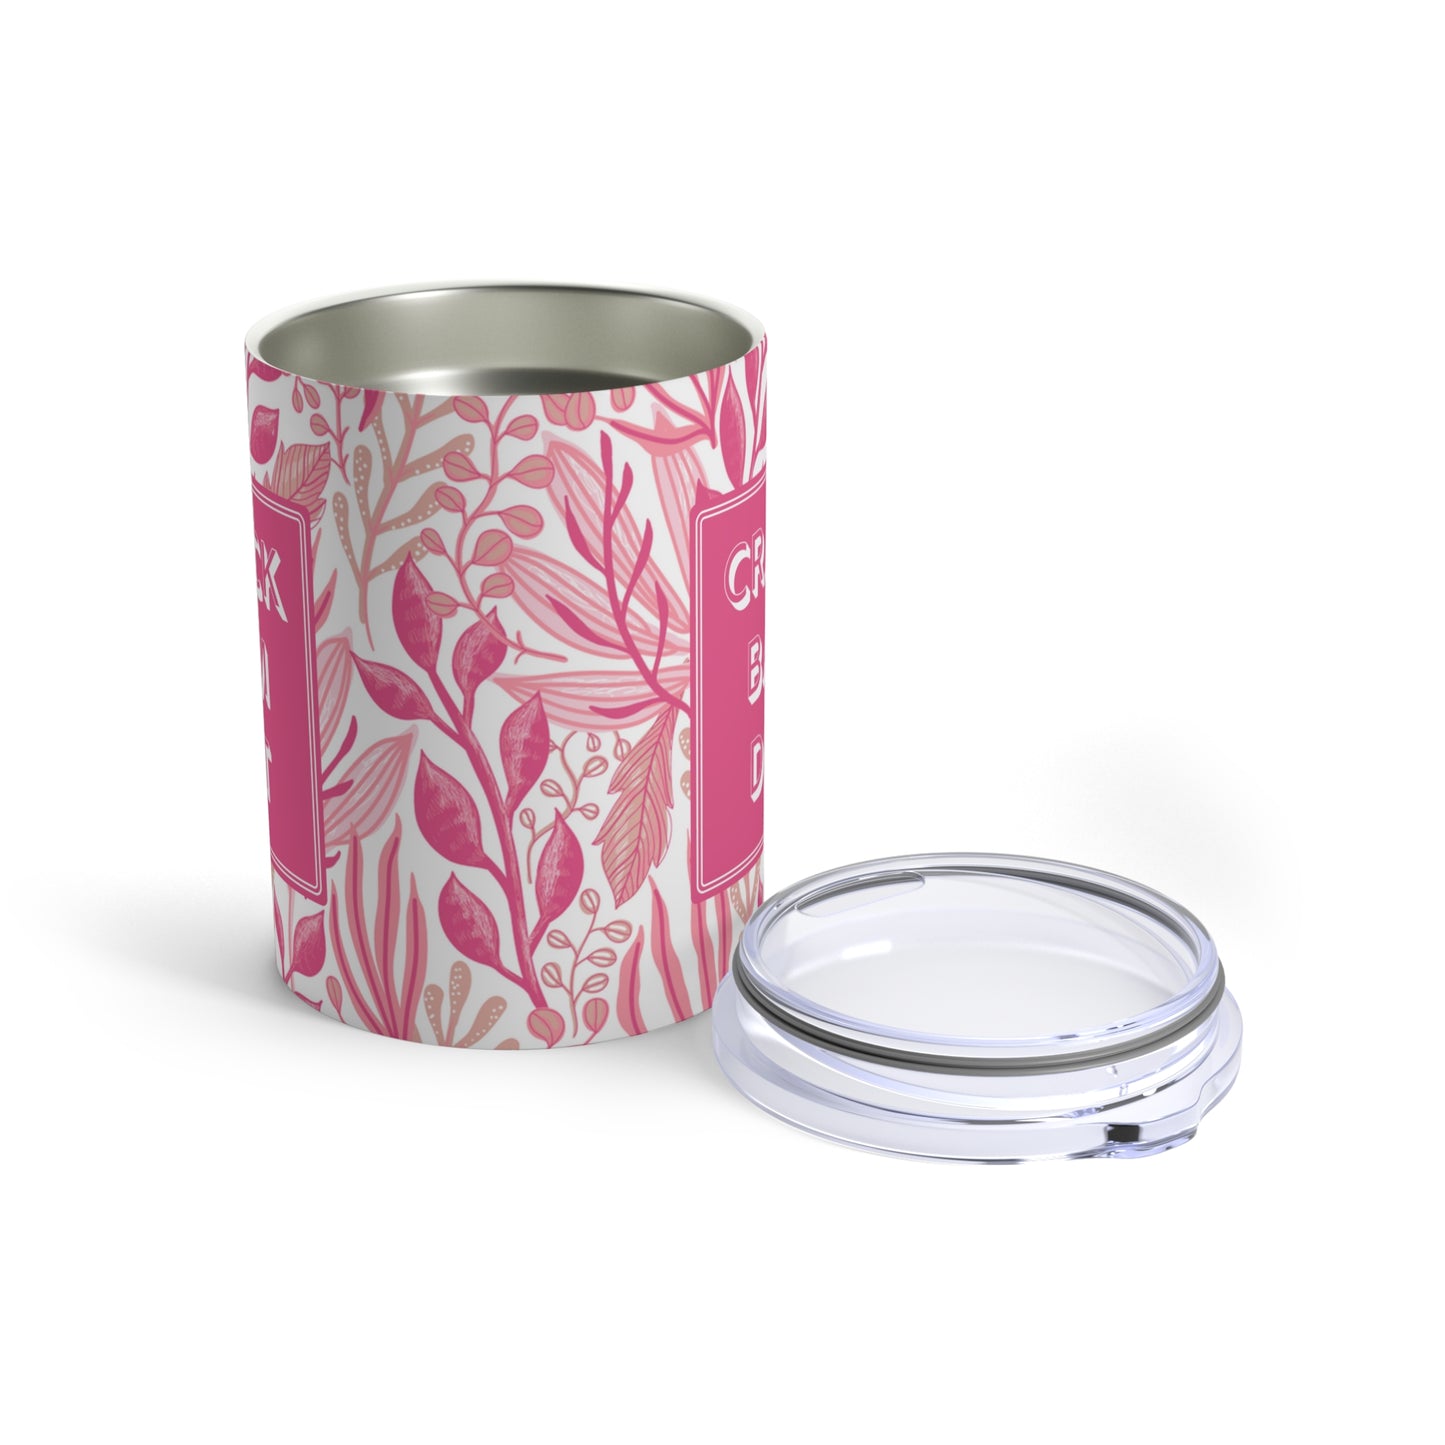 Mahjong Tumbler, Pink (10oz, Nature Pattern)- Perfect MAHJ gift! Every Mahjongg game needs a beverage, and Crack, Bam, Dot- this is it!